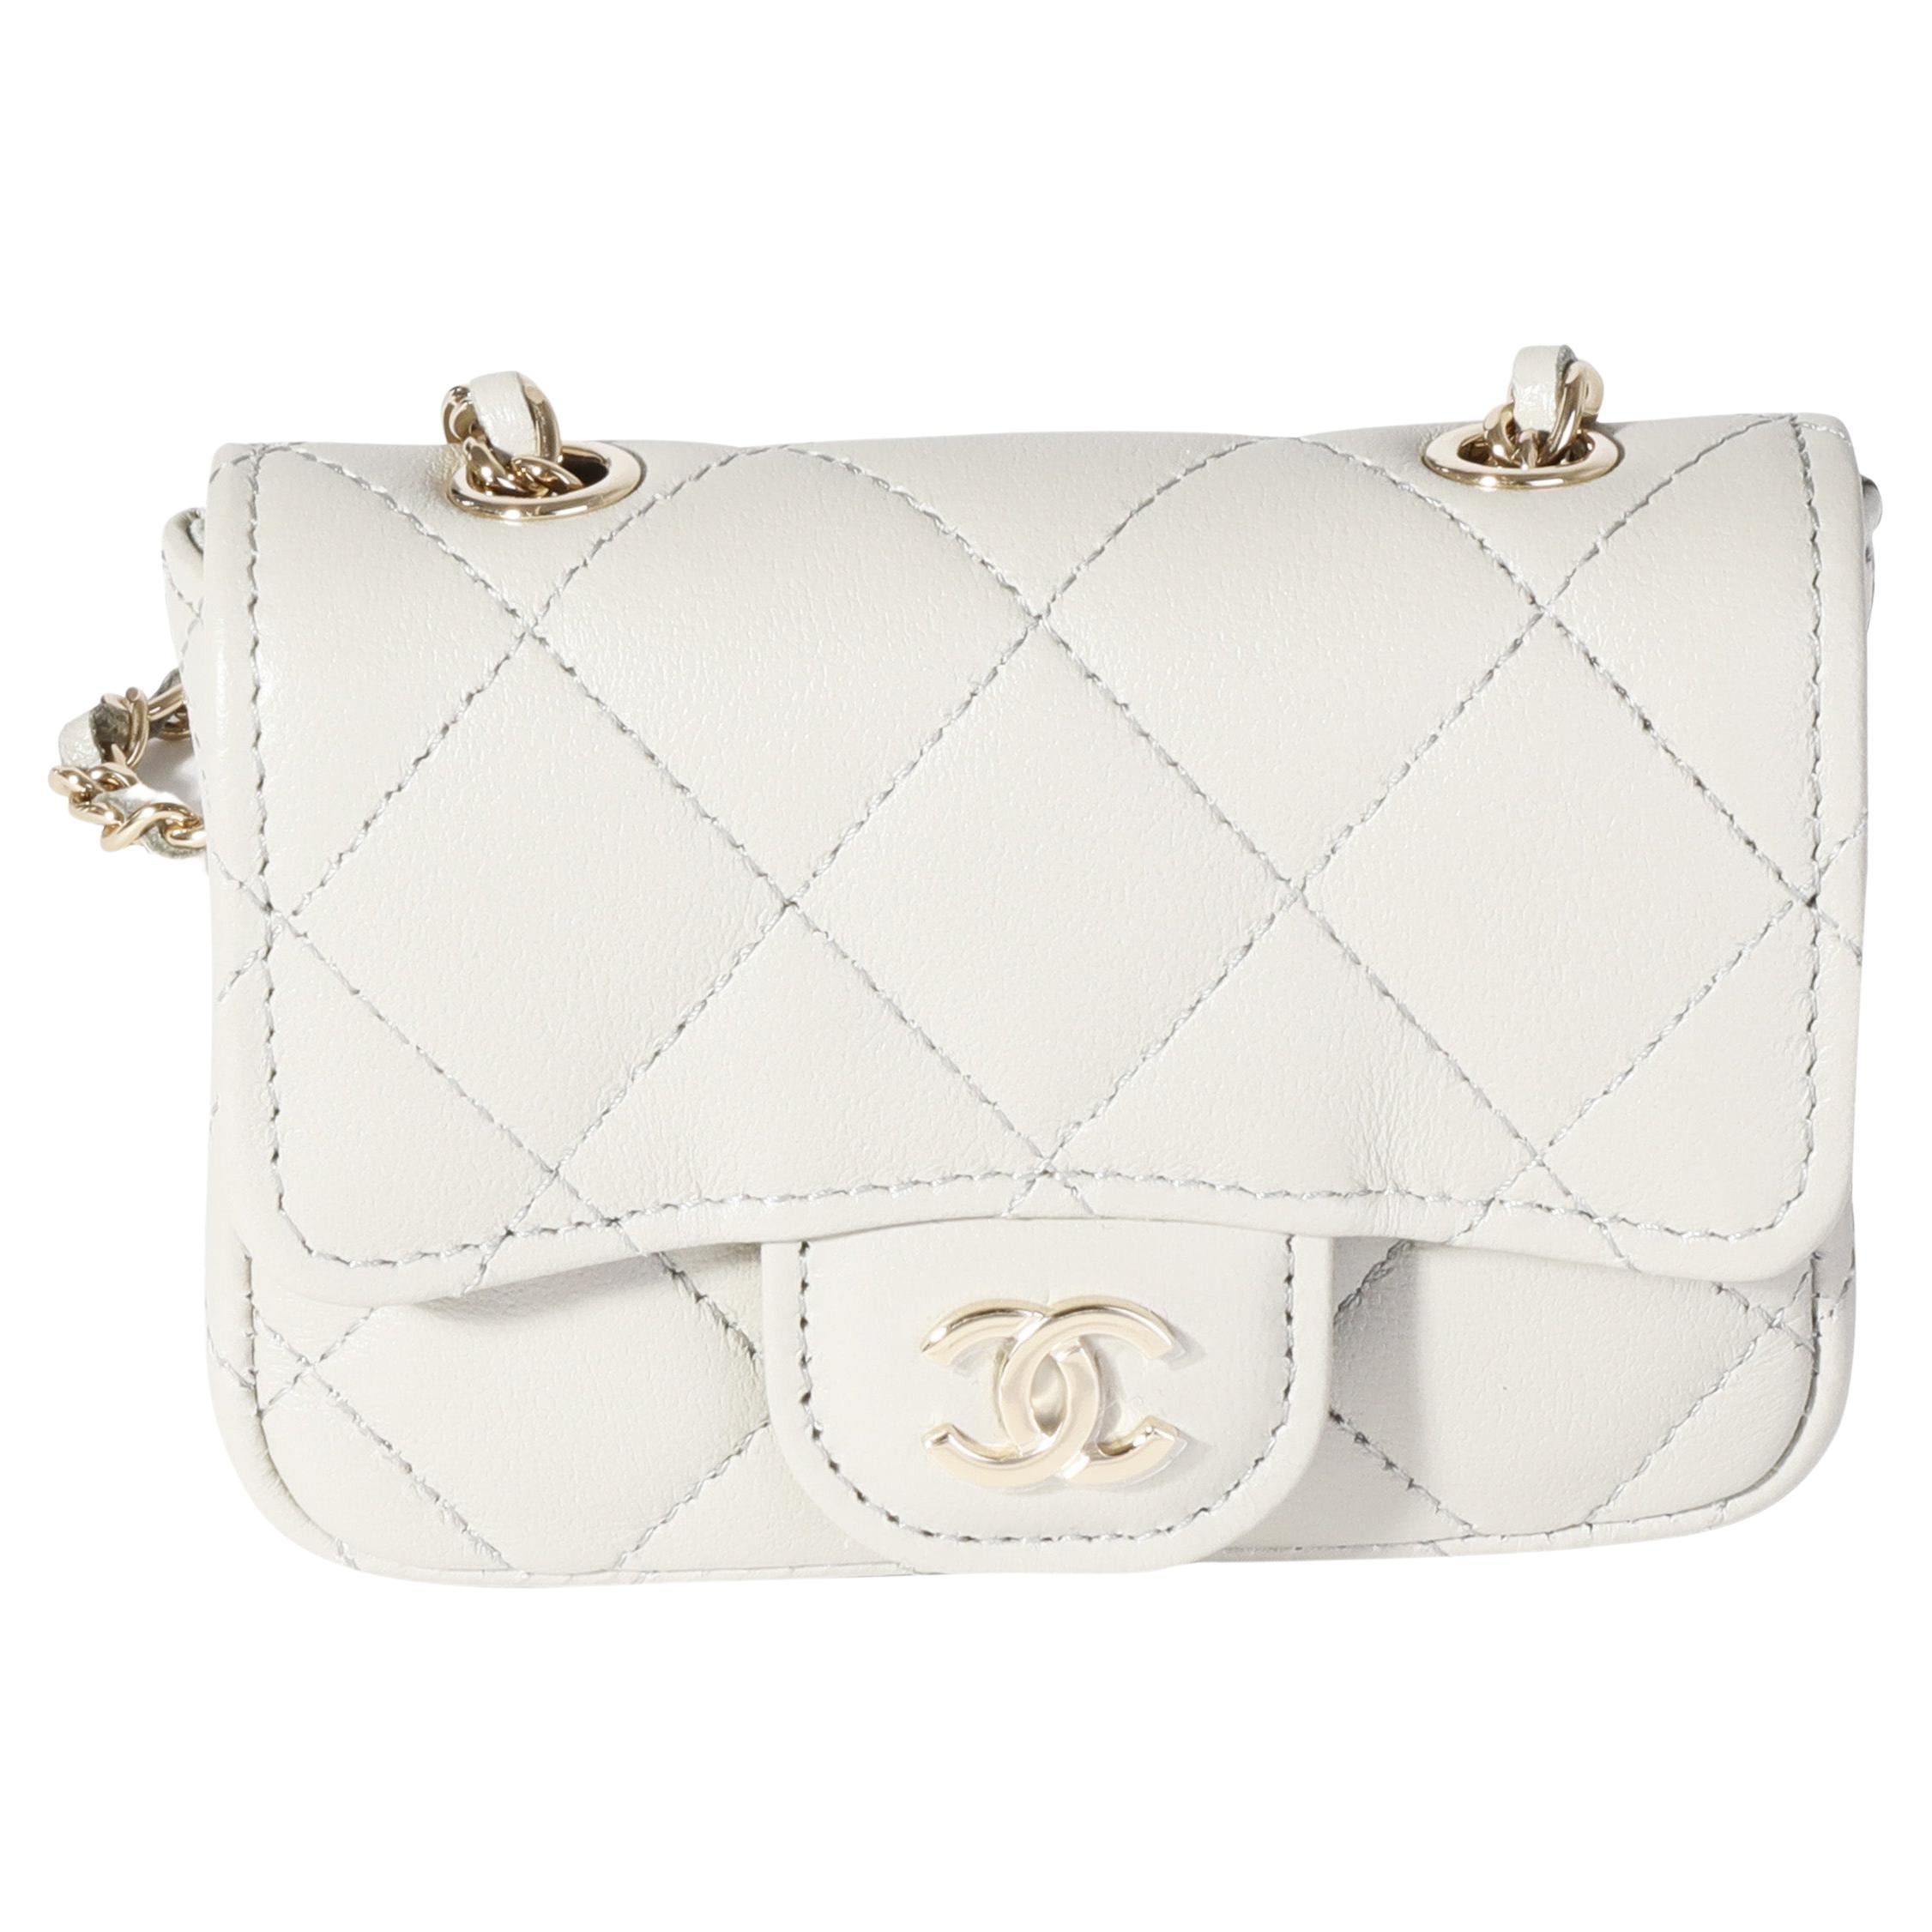 Chanel Silver Metallic Quilted Lambskin Coco Punk Belt Bag For